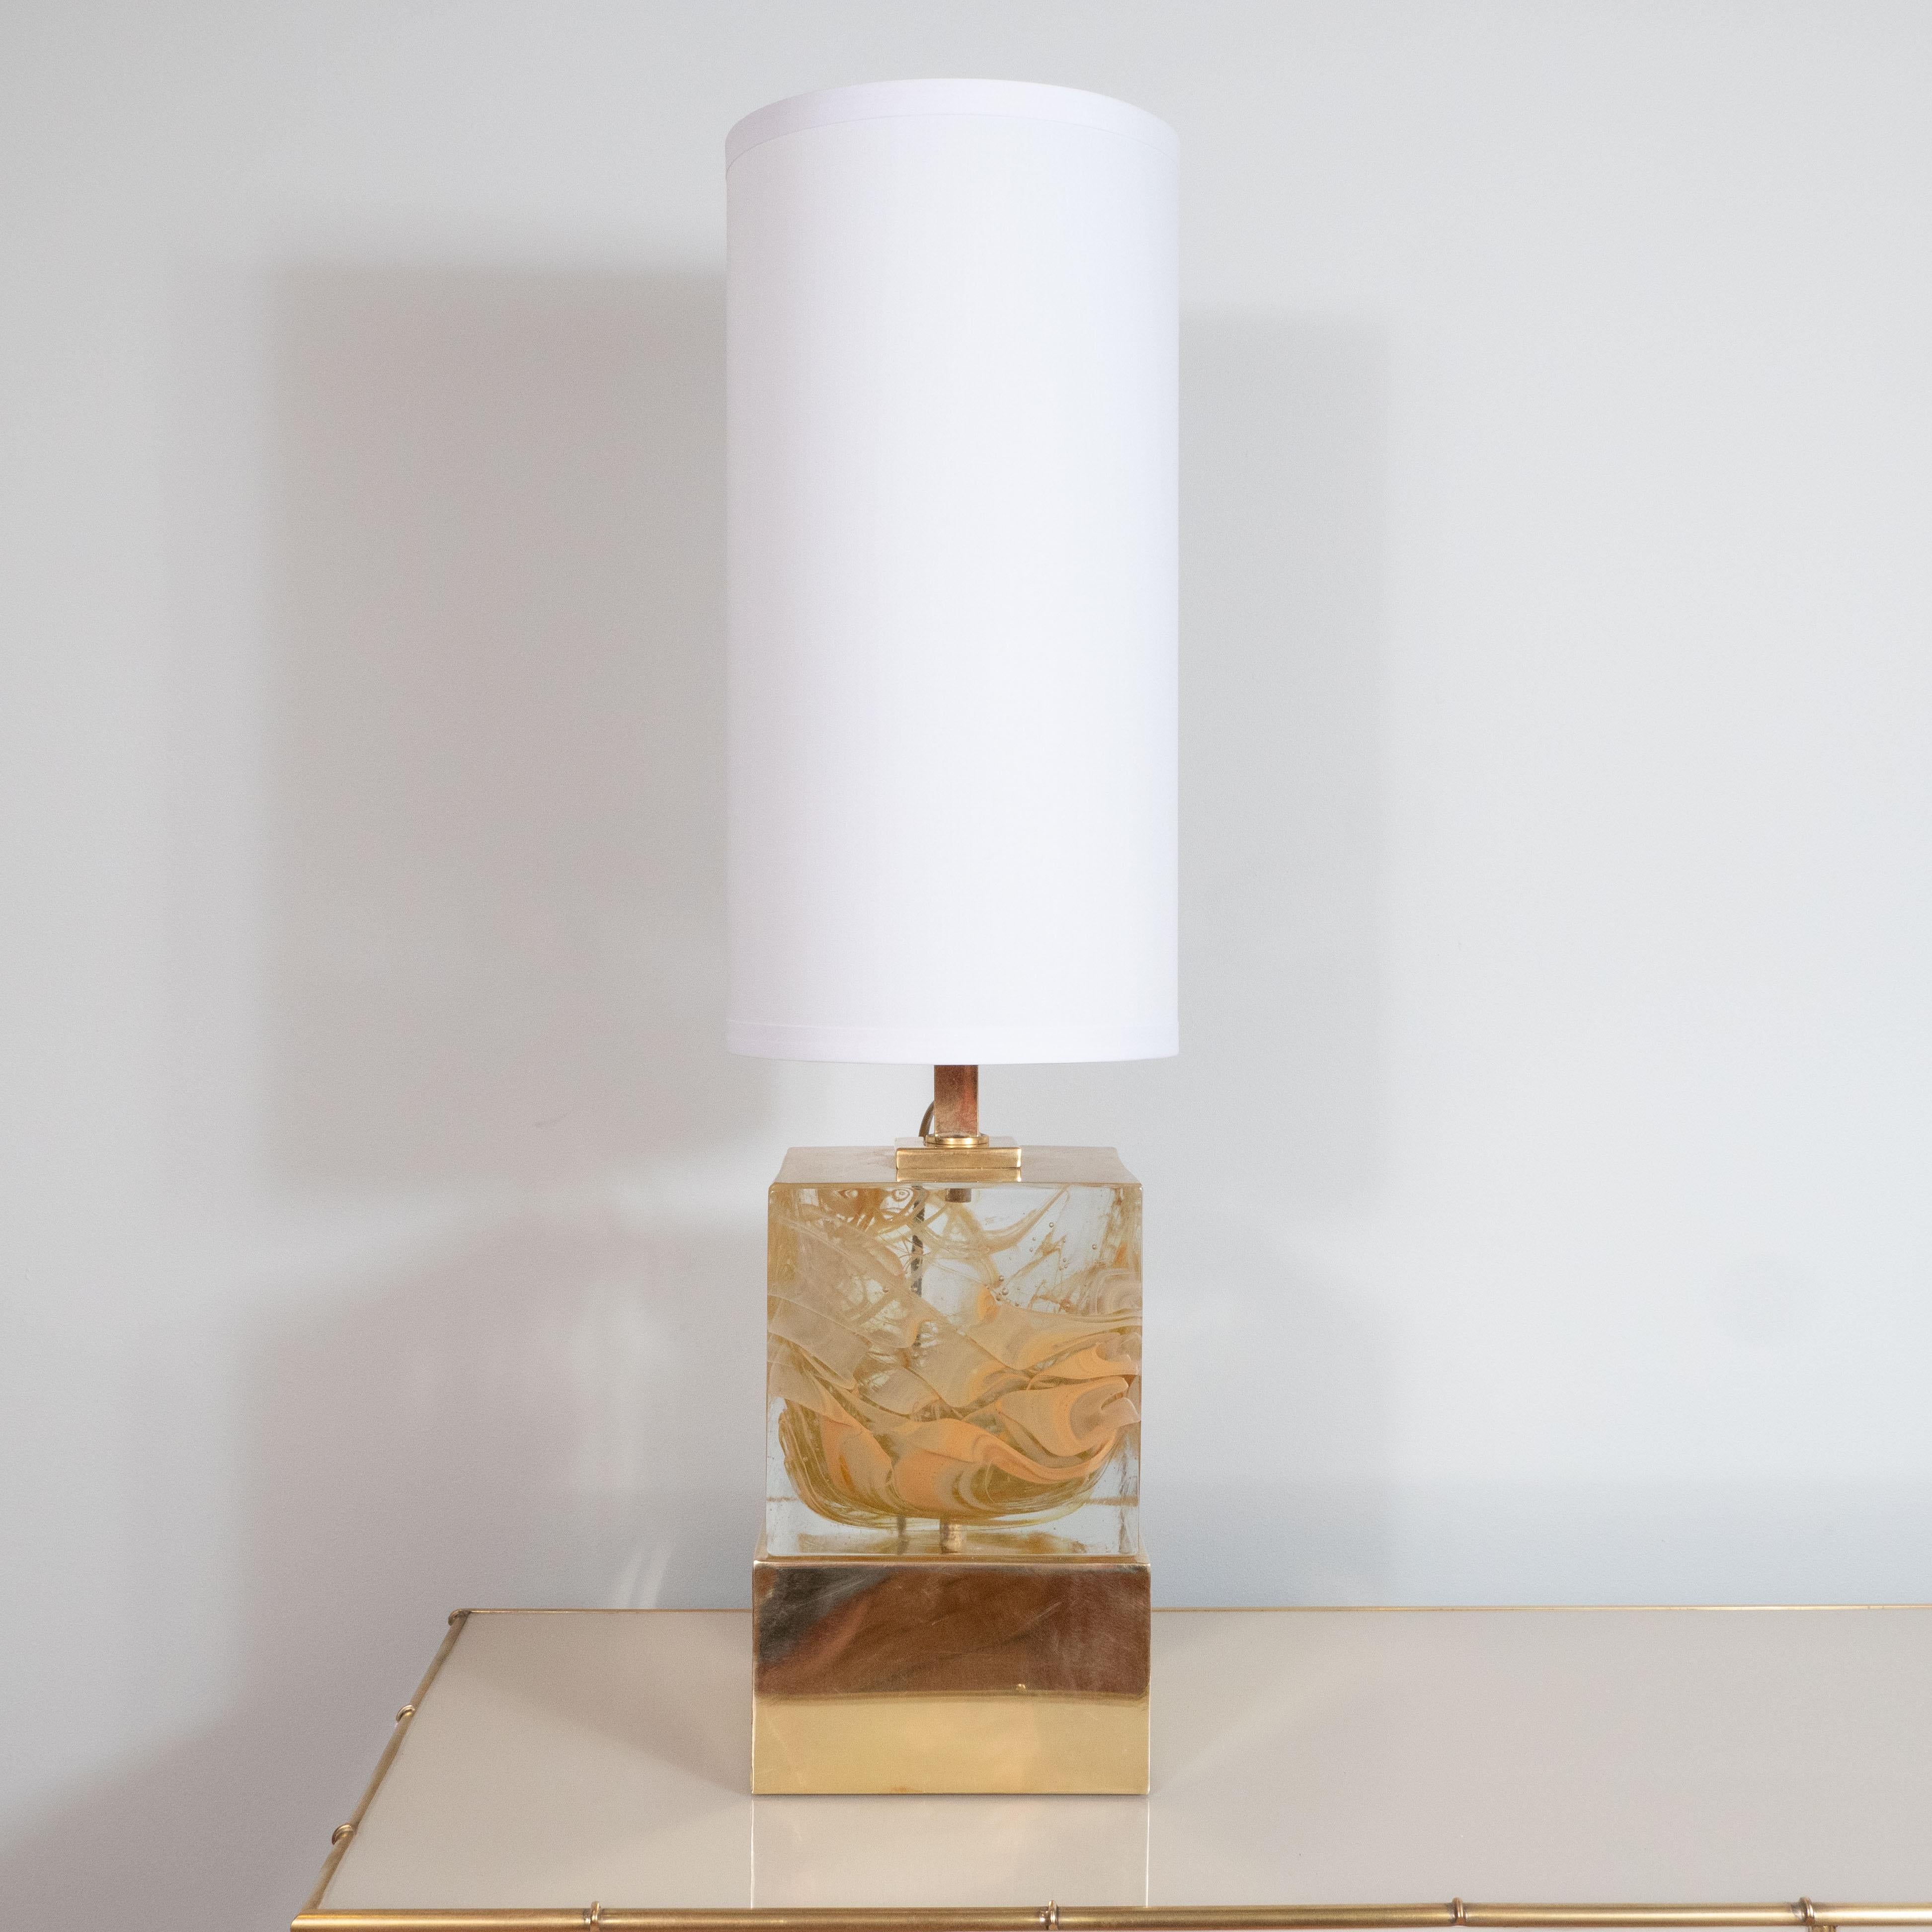 Pair of solid murano glass square cube lamps with natural brass base. Handmade in Venice using a technique that infuses natural dyes into the glass as it is cast to produce a swirl effect, giving it an almost a jeweled rock look. Predominant colors